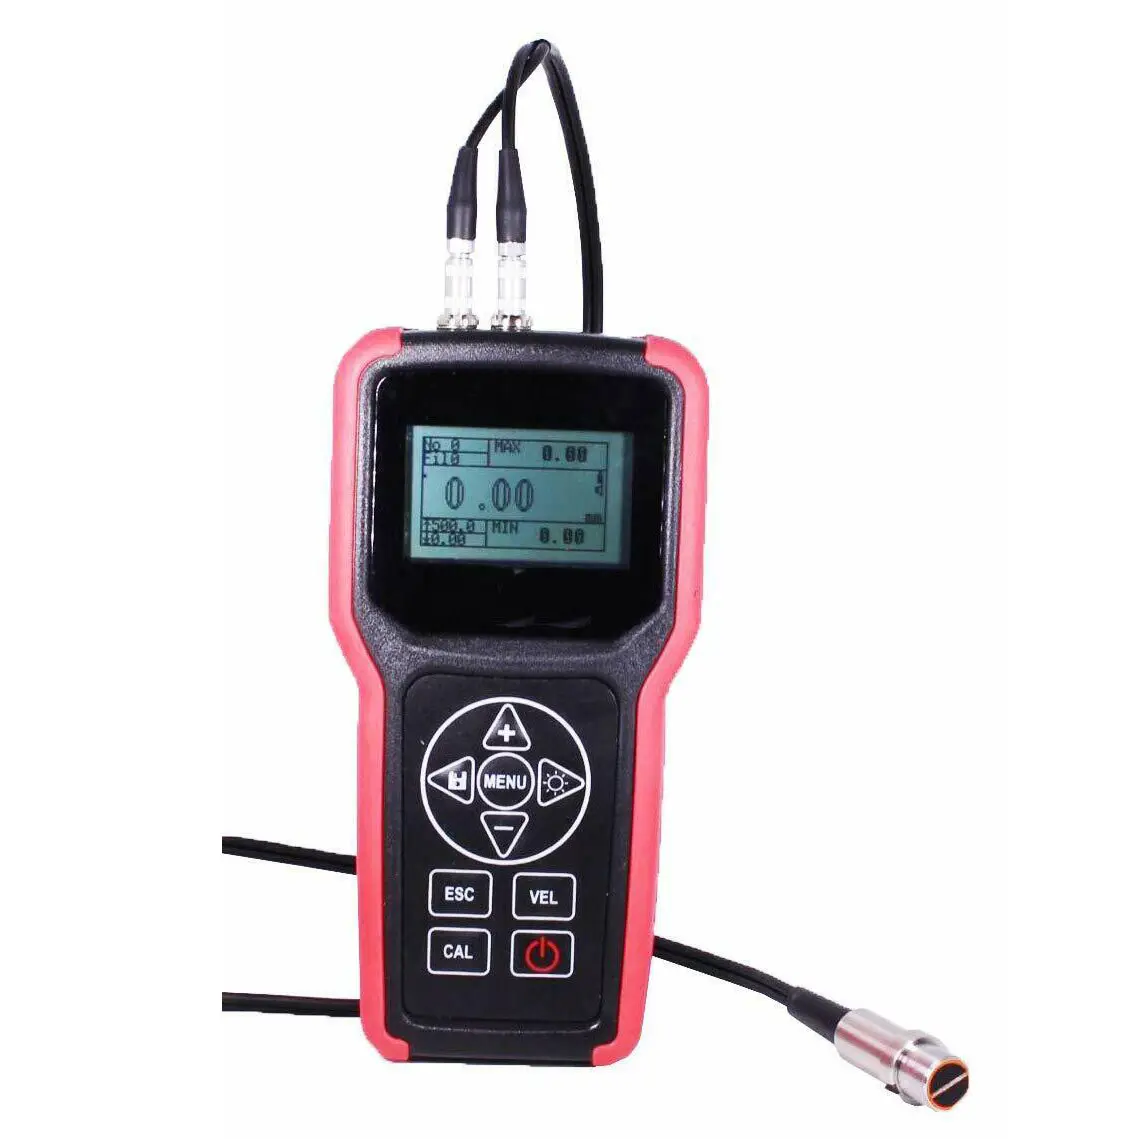 Handheld Ultrasonic Thickness Gauge Tester Meter with Measuring Range 0.75 to 400mm Sound Velocity 1000 to 9999 m/s